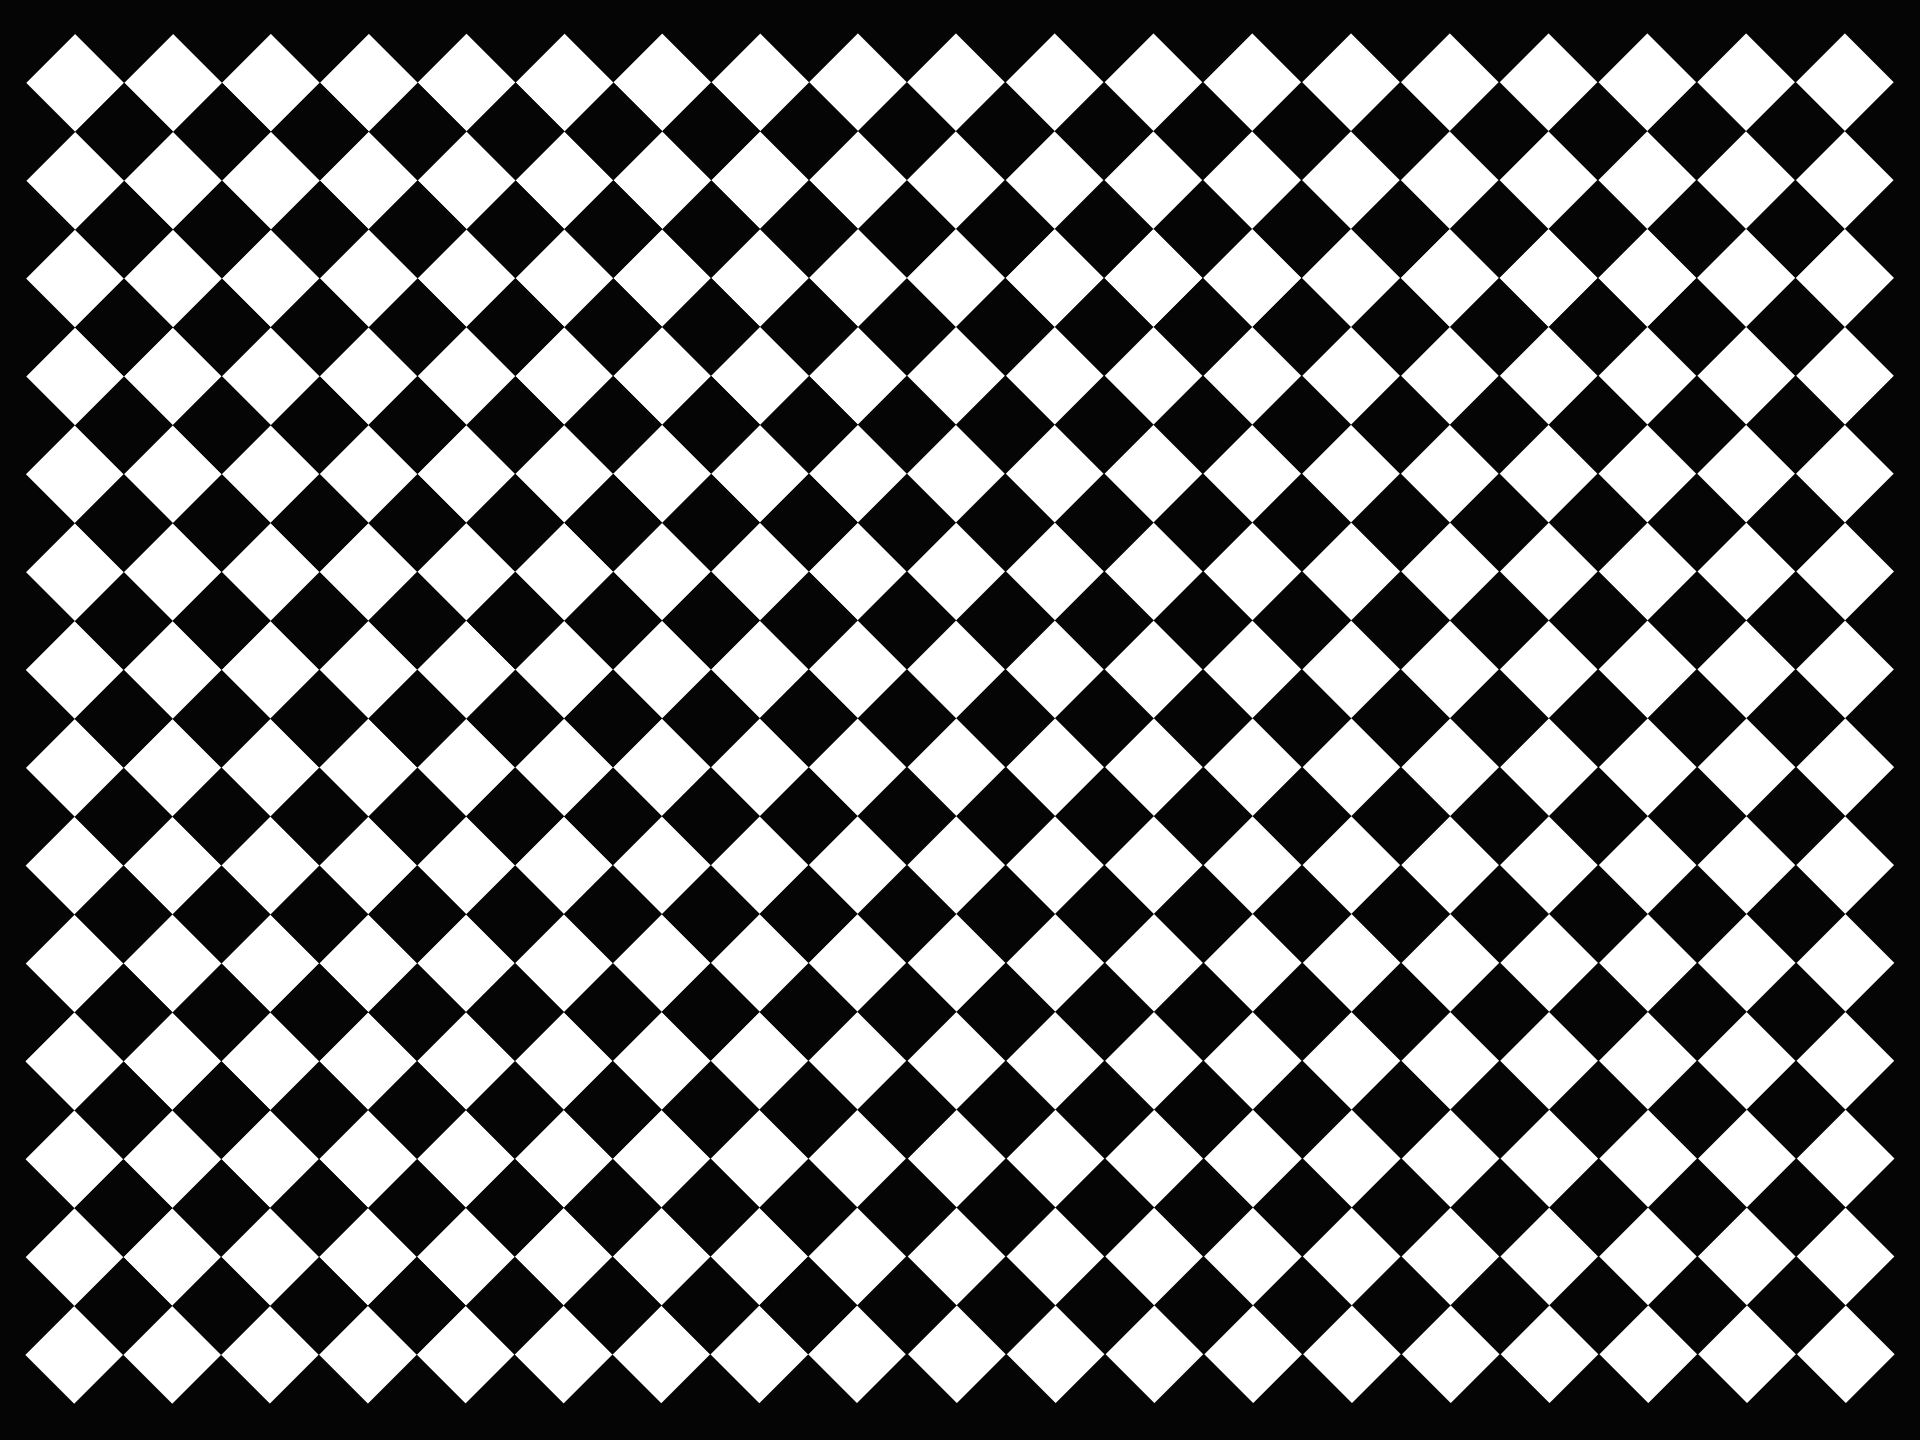 7 Best Images of Printable Checkerboard Game Free Printable Checkers Board Game, Printable